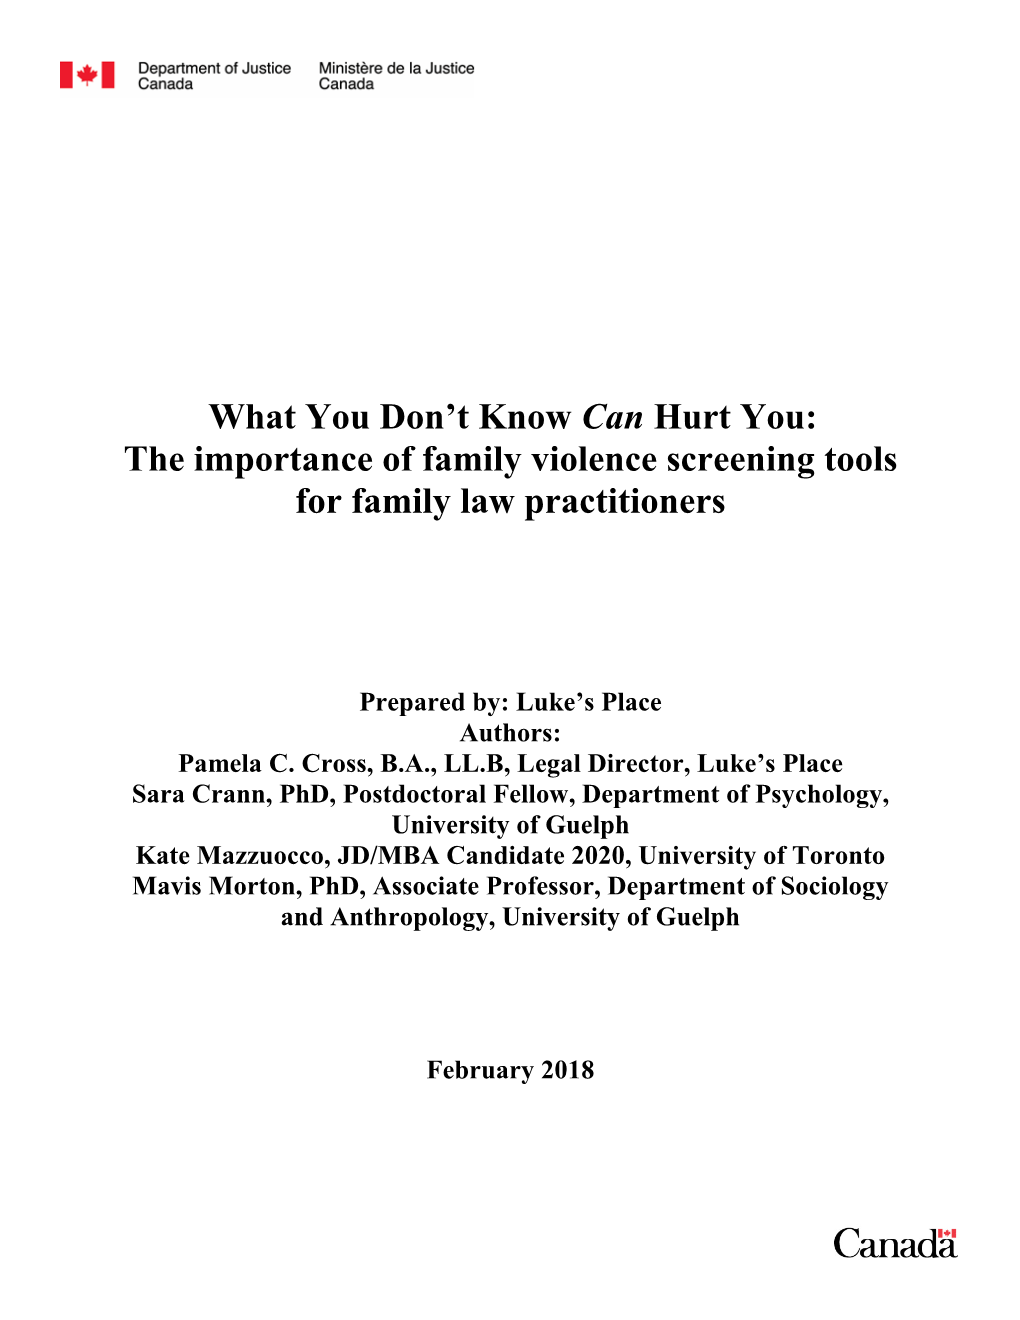 The Importance of Family Violence Screening Tools for Family Law Practitioners